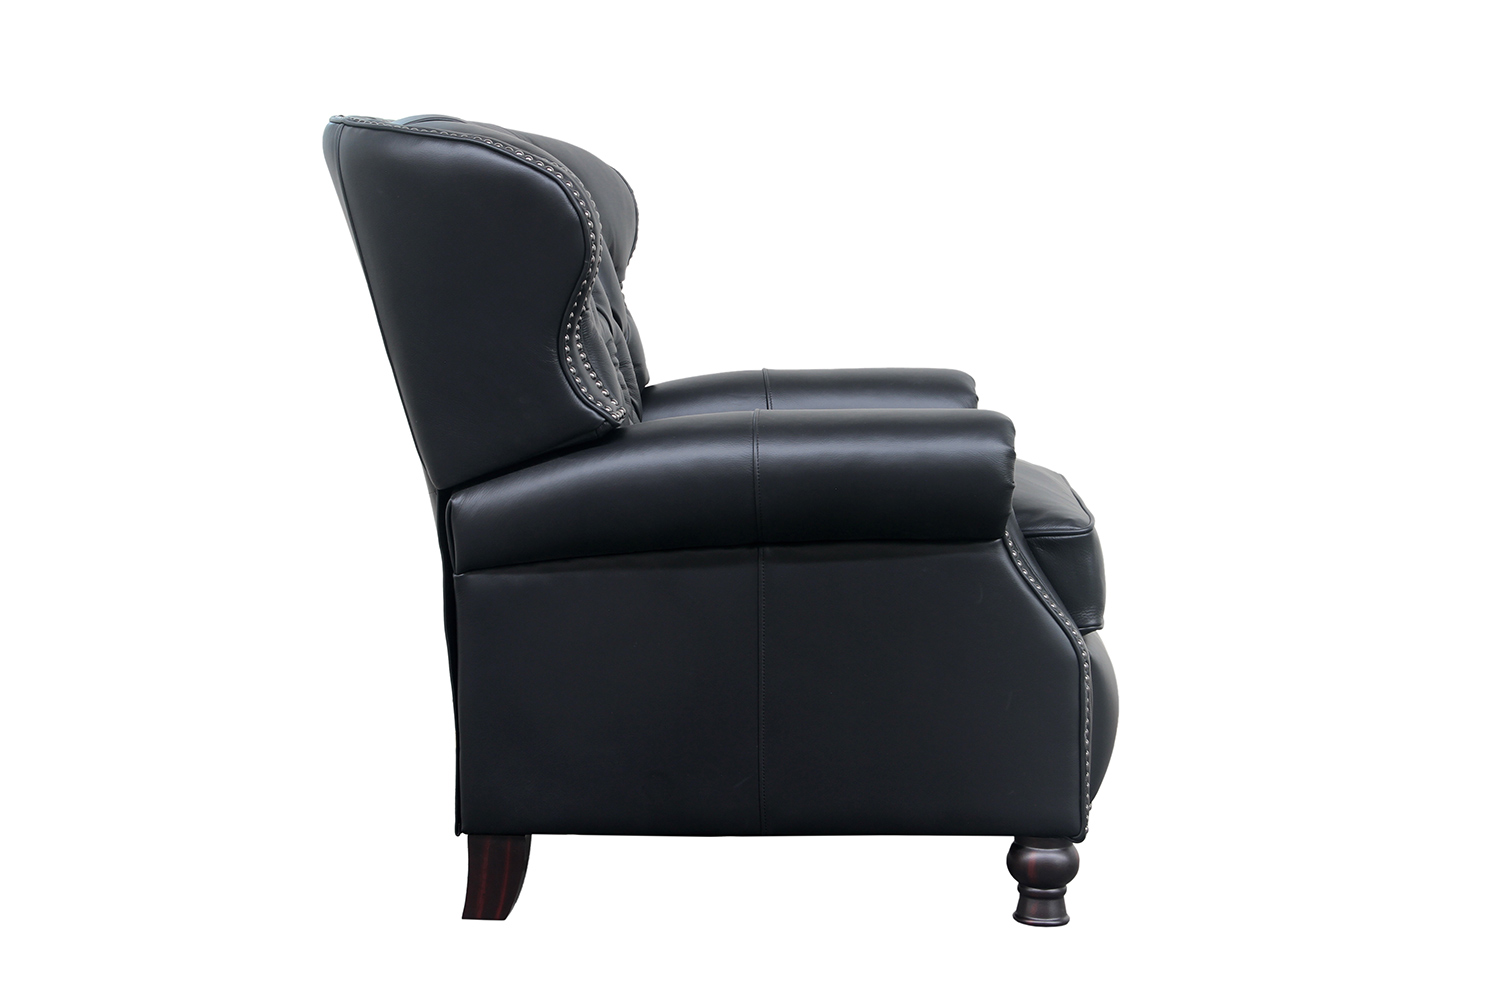 Barcalounger Presidential Recliner Chair - Wenlock Onyx/All Leather